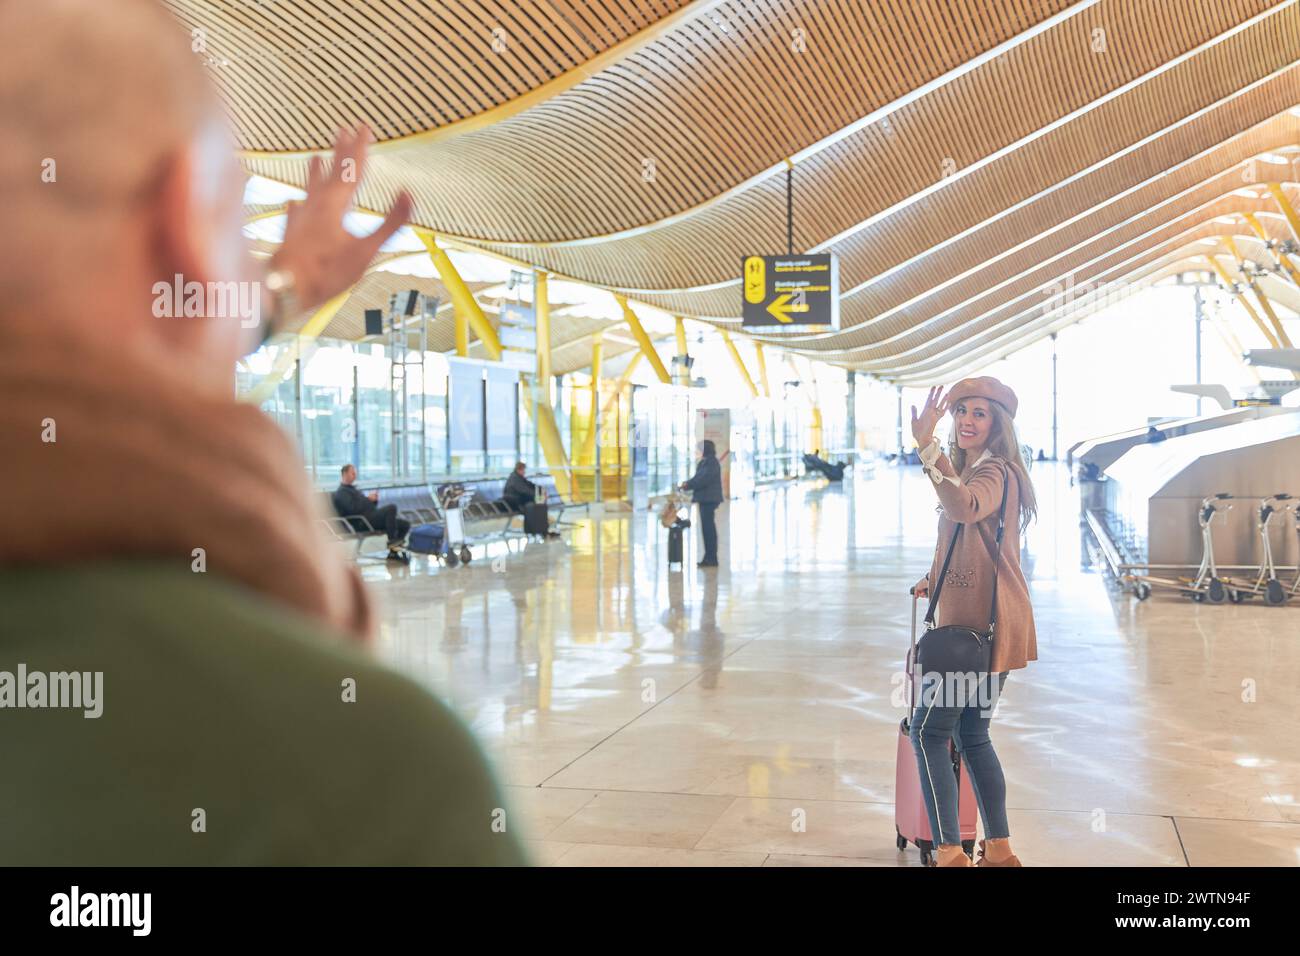 couple in love saying goodbye. woman raises her arm in farewell to her partner at the airport terminal. Stock Photo